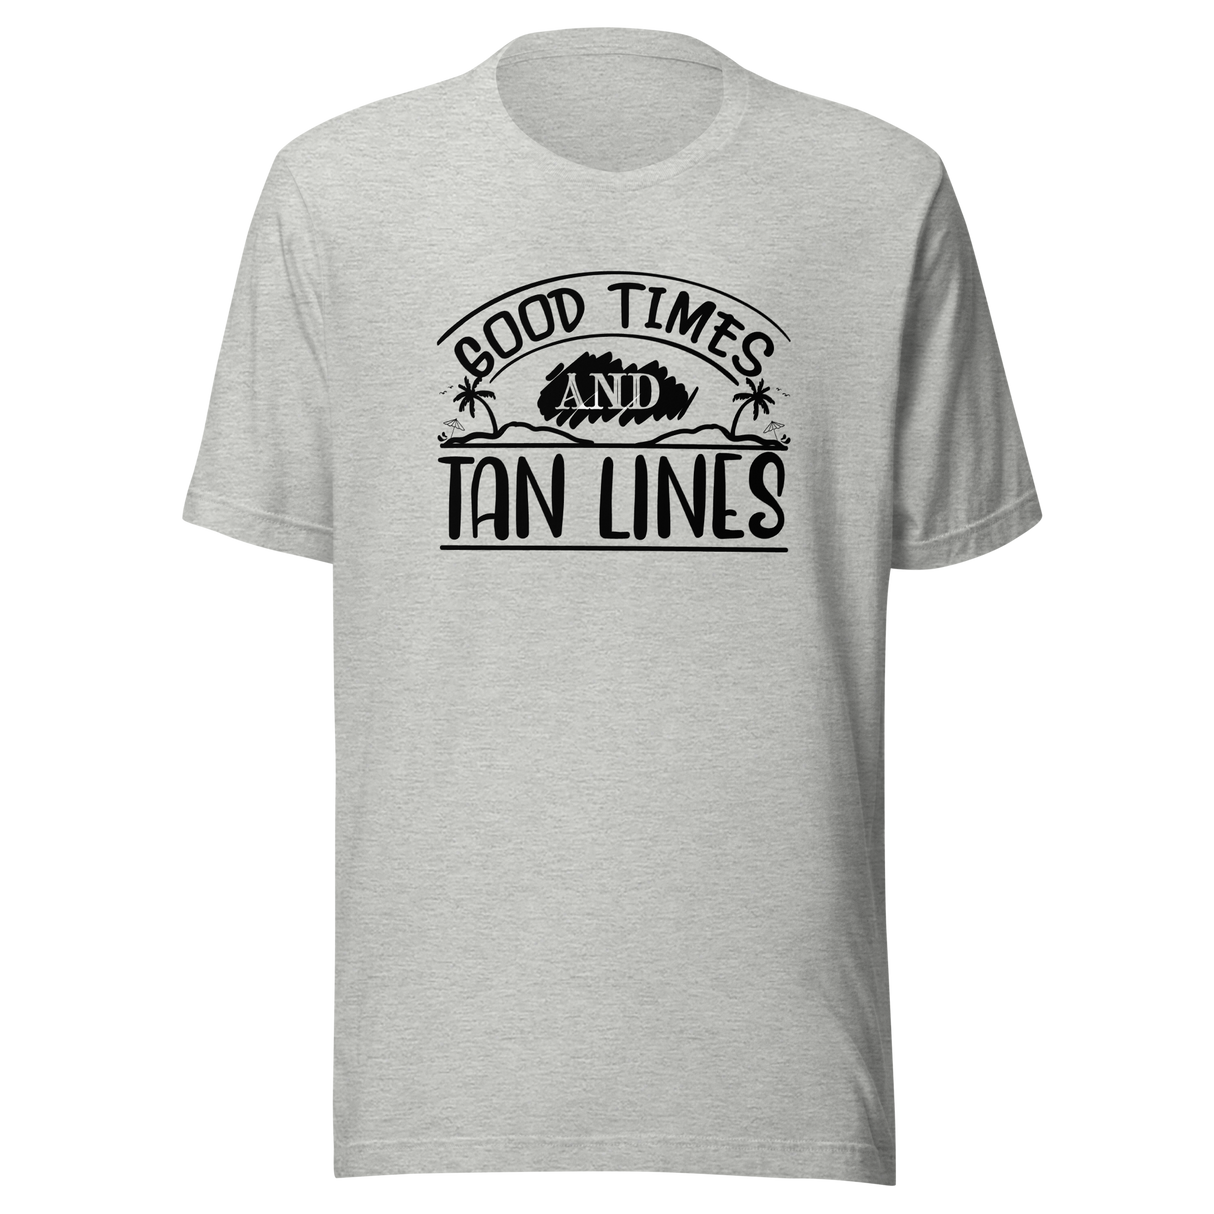 good-times-and-tan-lines-summer-tee-good-times-t-shirt-tan-tee-beach-t-shirt-life-tee#color_athletic-heather